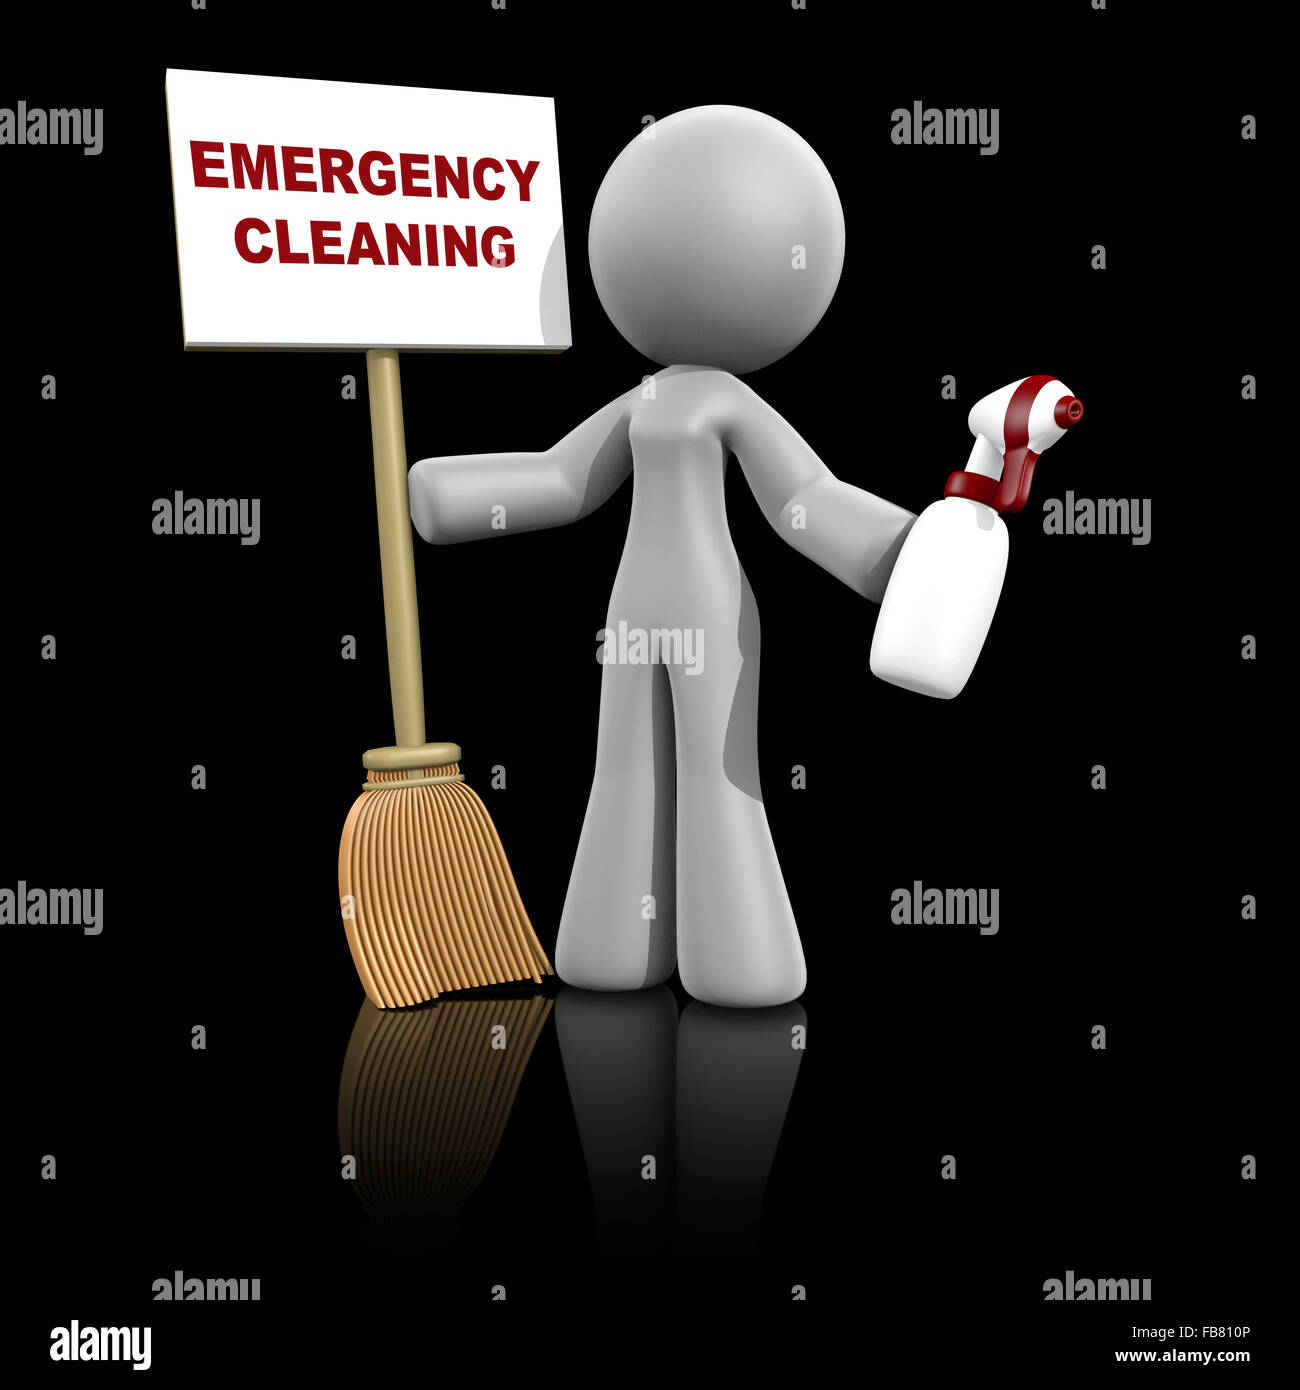 3d lady holding sign that doubles as a broom - a classy concept to advertise cleaning services. Dark reflective background. Stock Photo